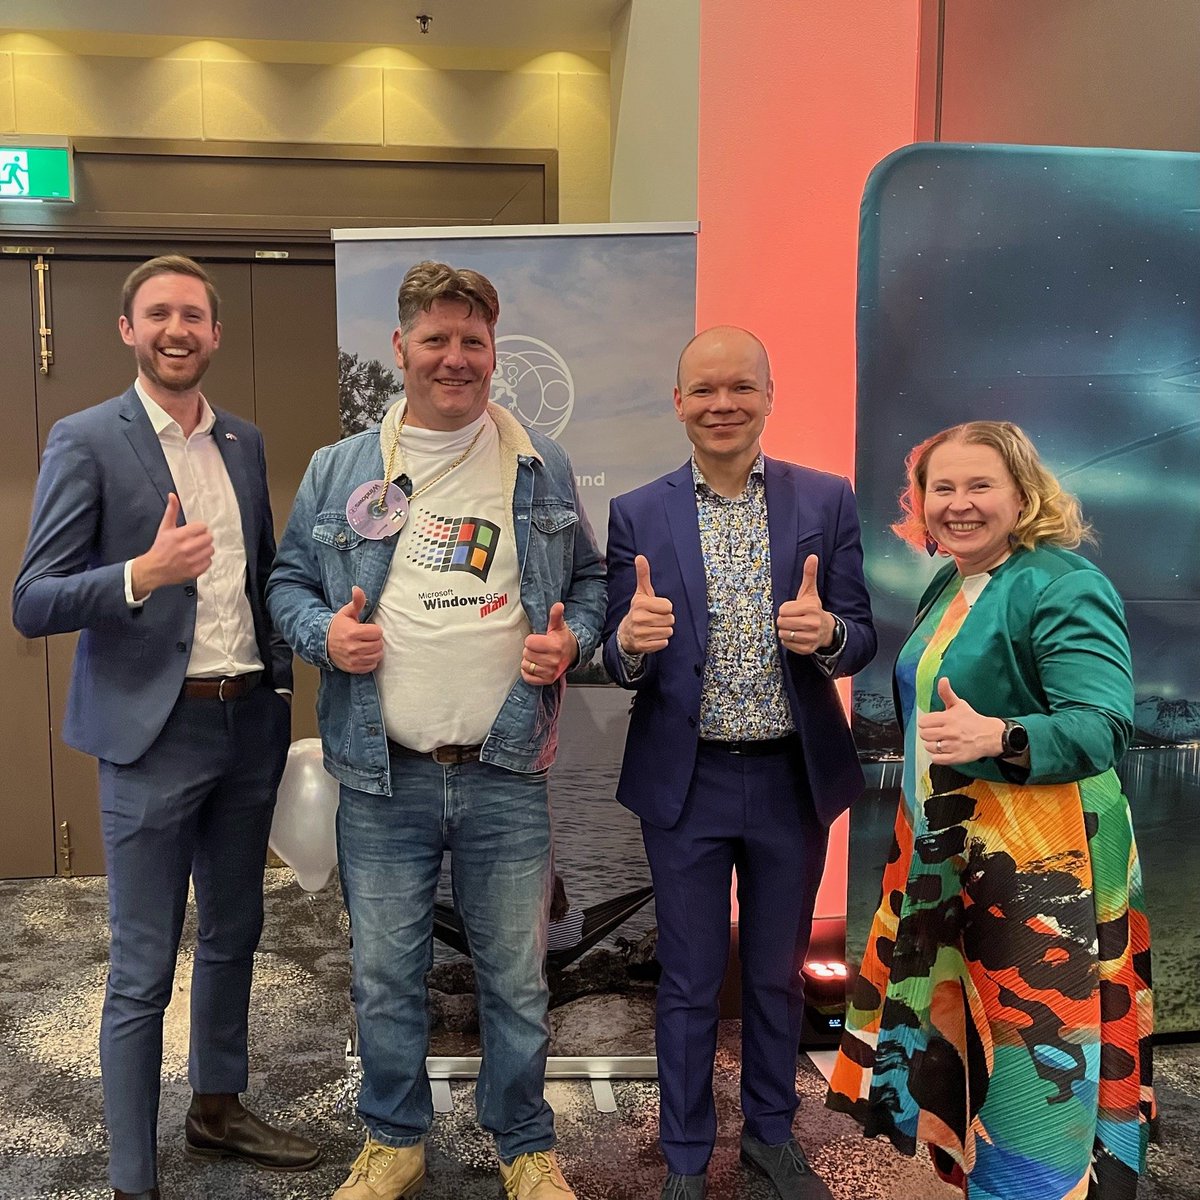 Last night we co-hosted a celebration of Eurovision with the Canberra Diplomatic Club! Spotted in the crowd was 'Finland's' @windows95man! Special thanks to the @SwedeninOZ for leading the way!